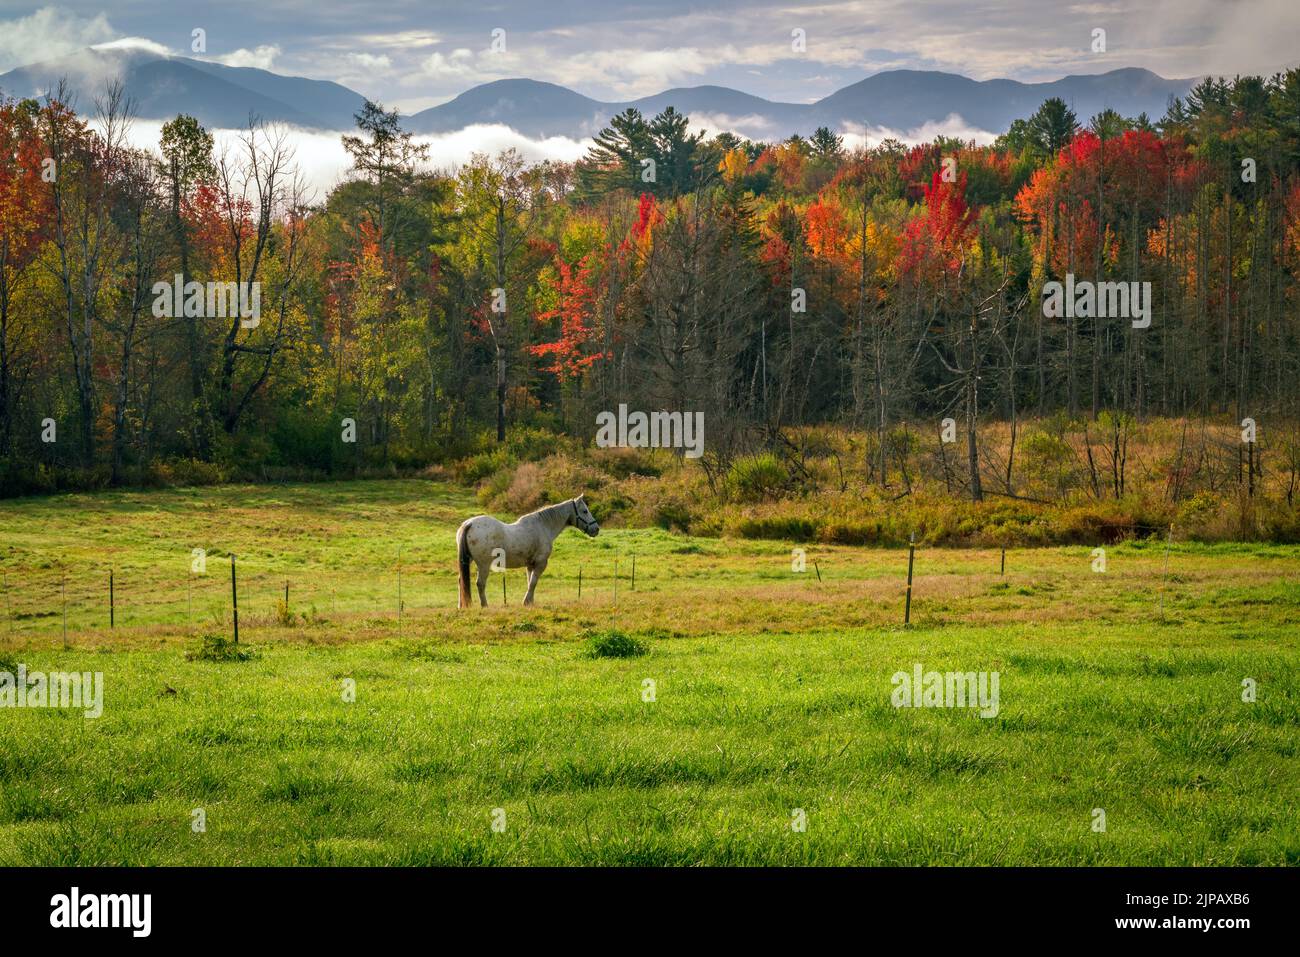 White horse standing in a field of grass with colorful autun foliage and mountains in the background. Stock Photo